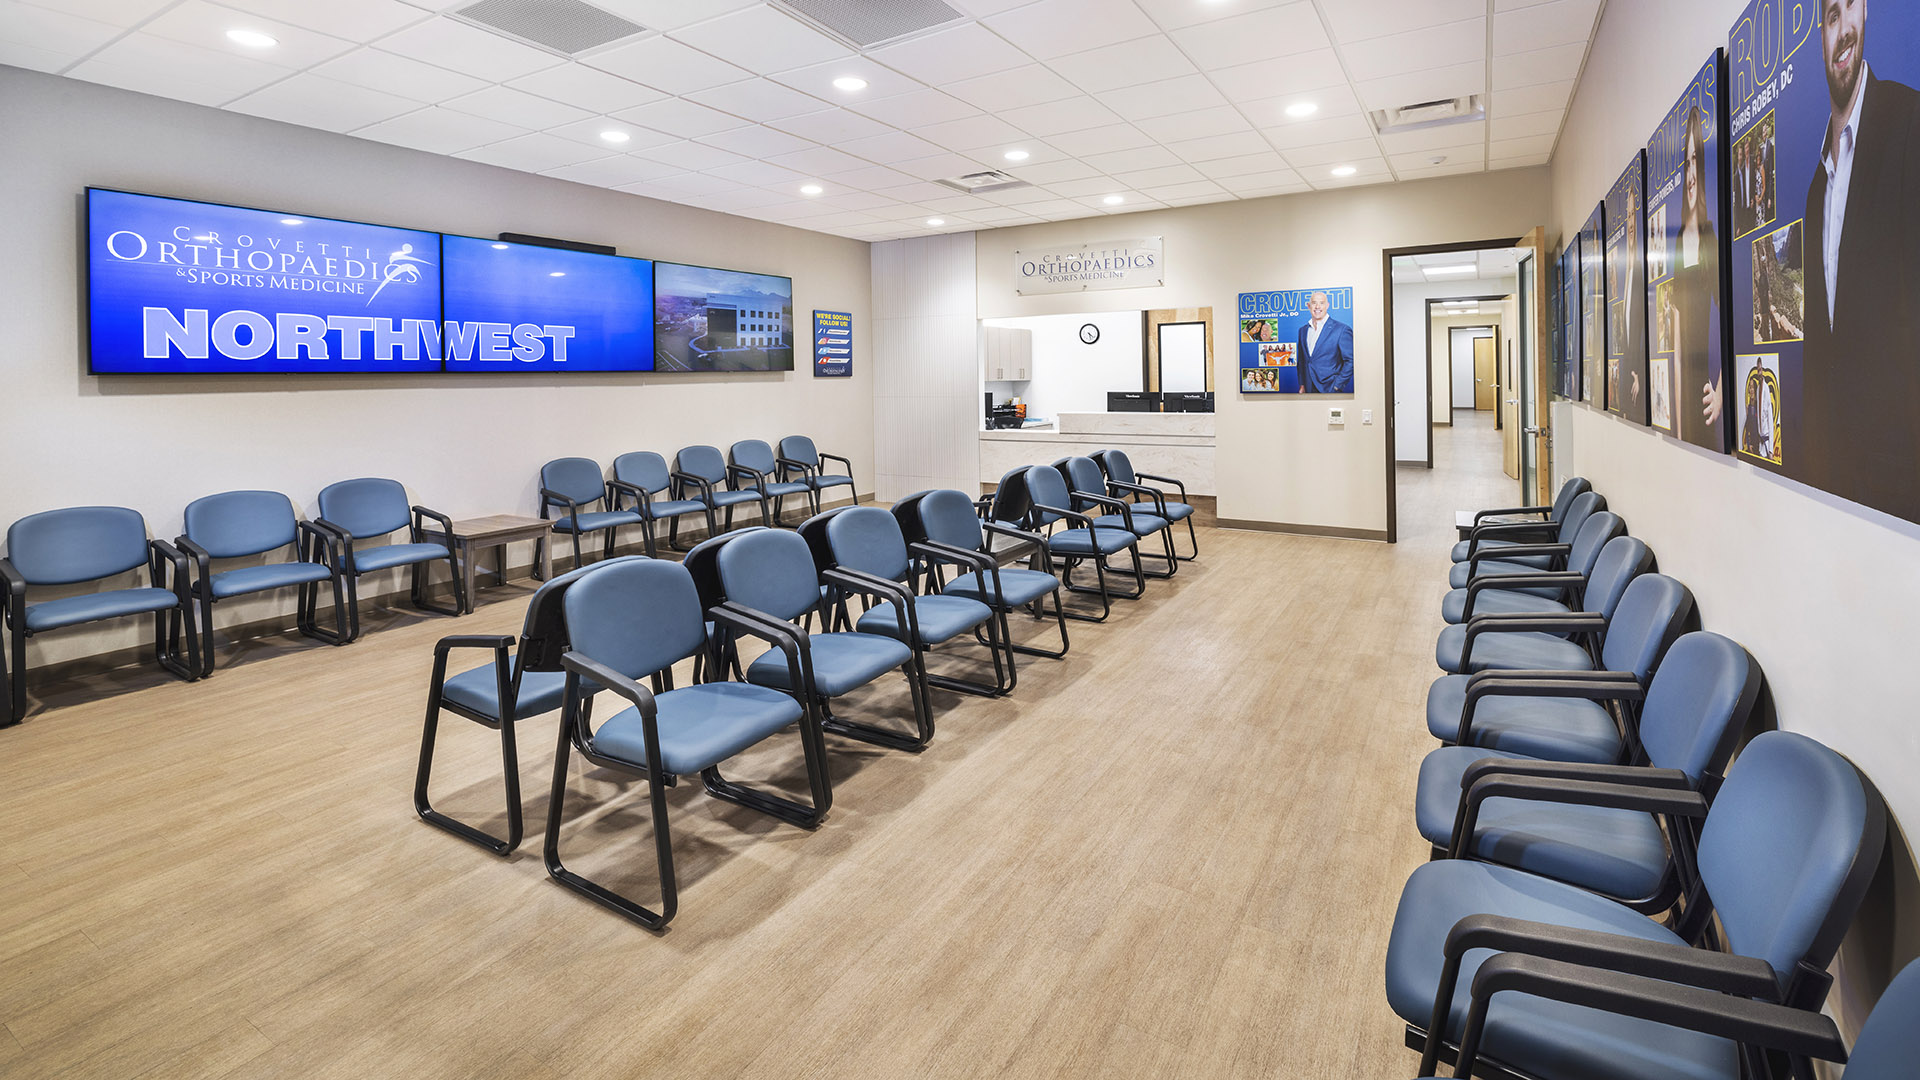 Patient and family waiting area at Crovetti Orthopaedics